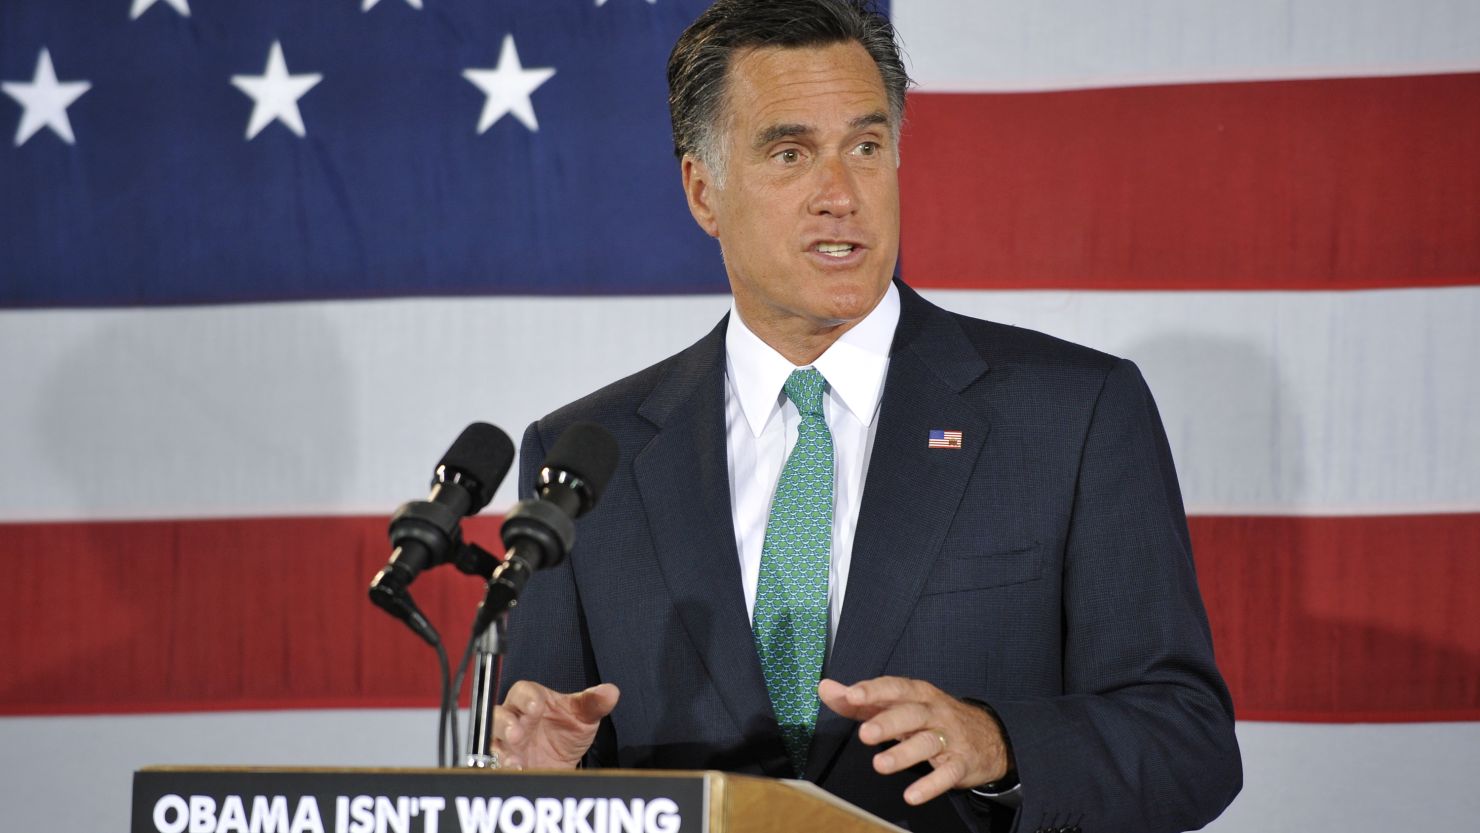 Mitt Romney speaks to supporters during a campaign stop on April 18, 2012 in Charlotte, North Carolina.